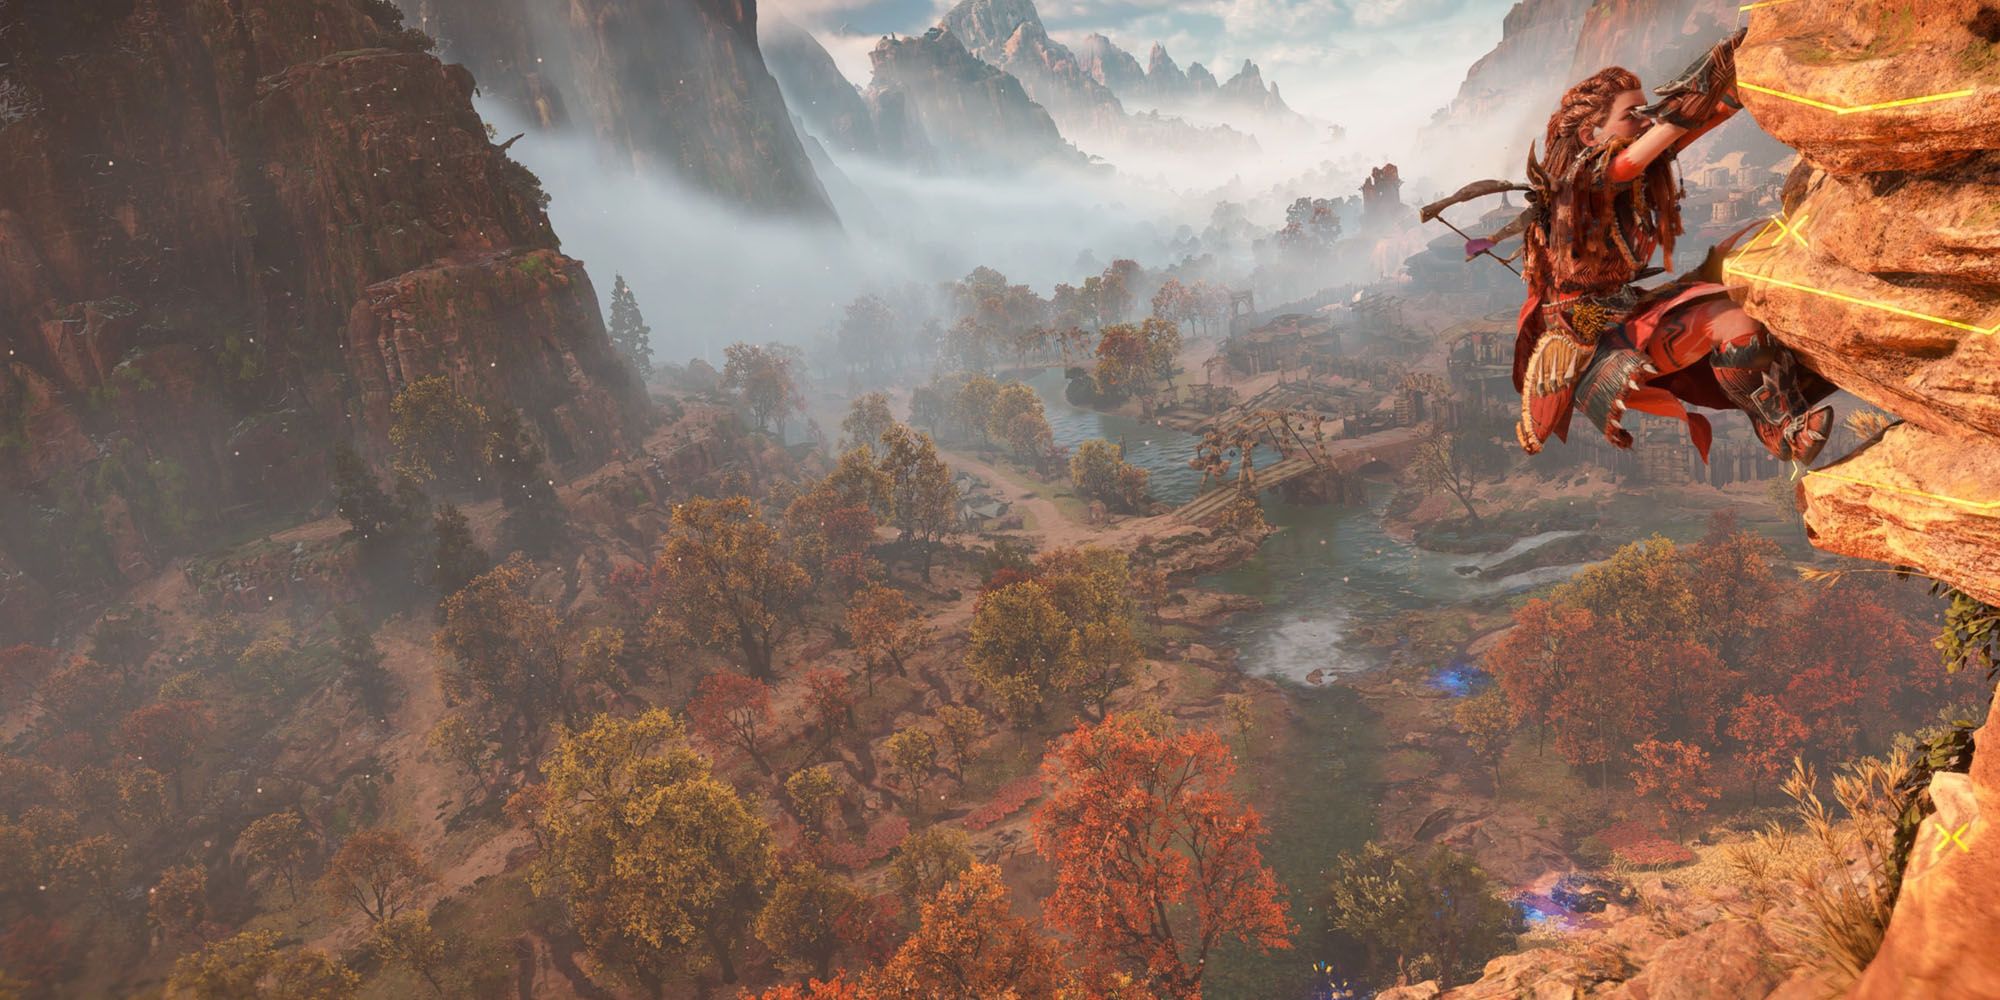 Aloy climbing a cliff edge in The Daunt